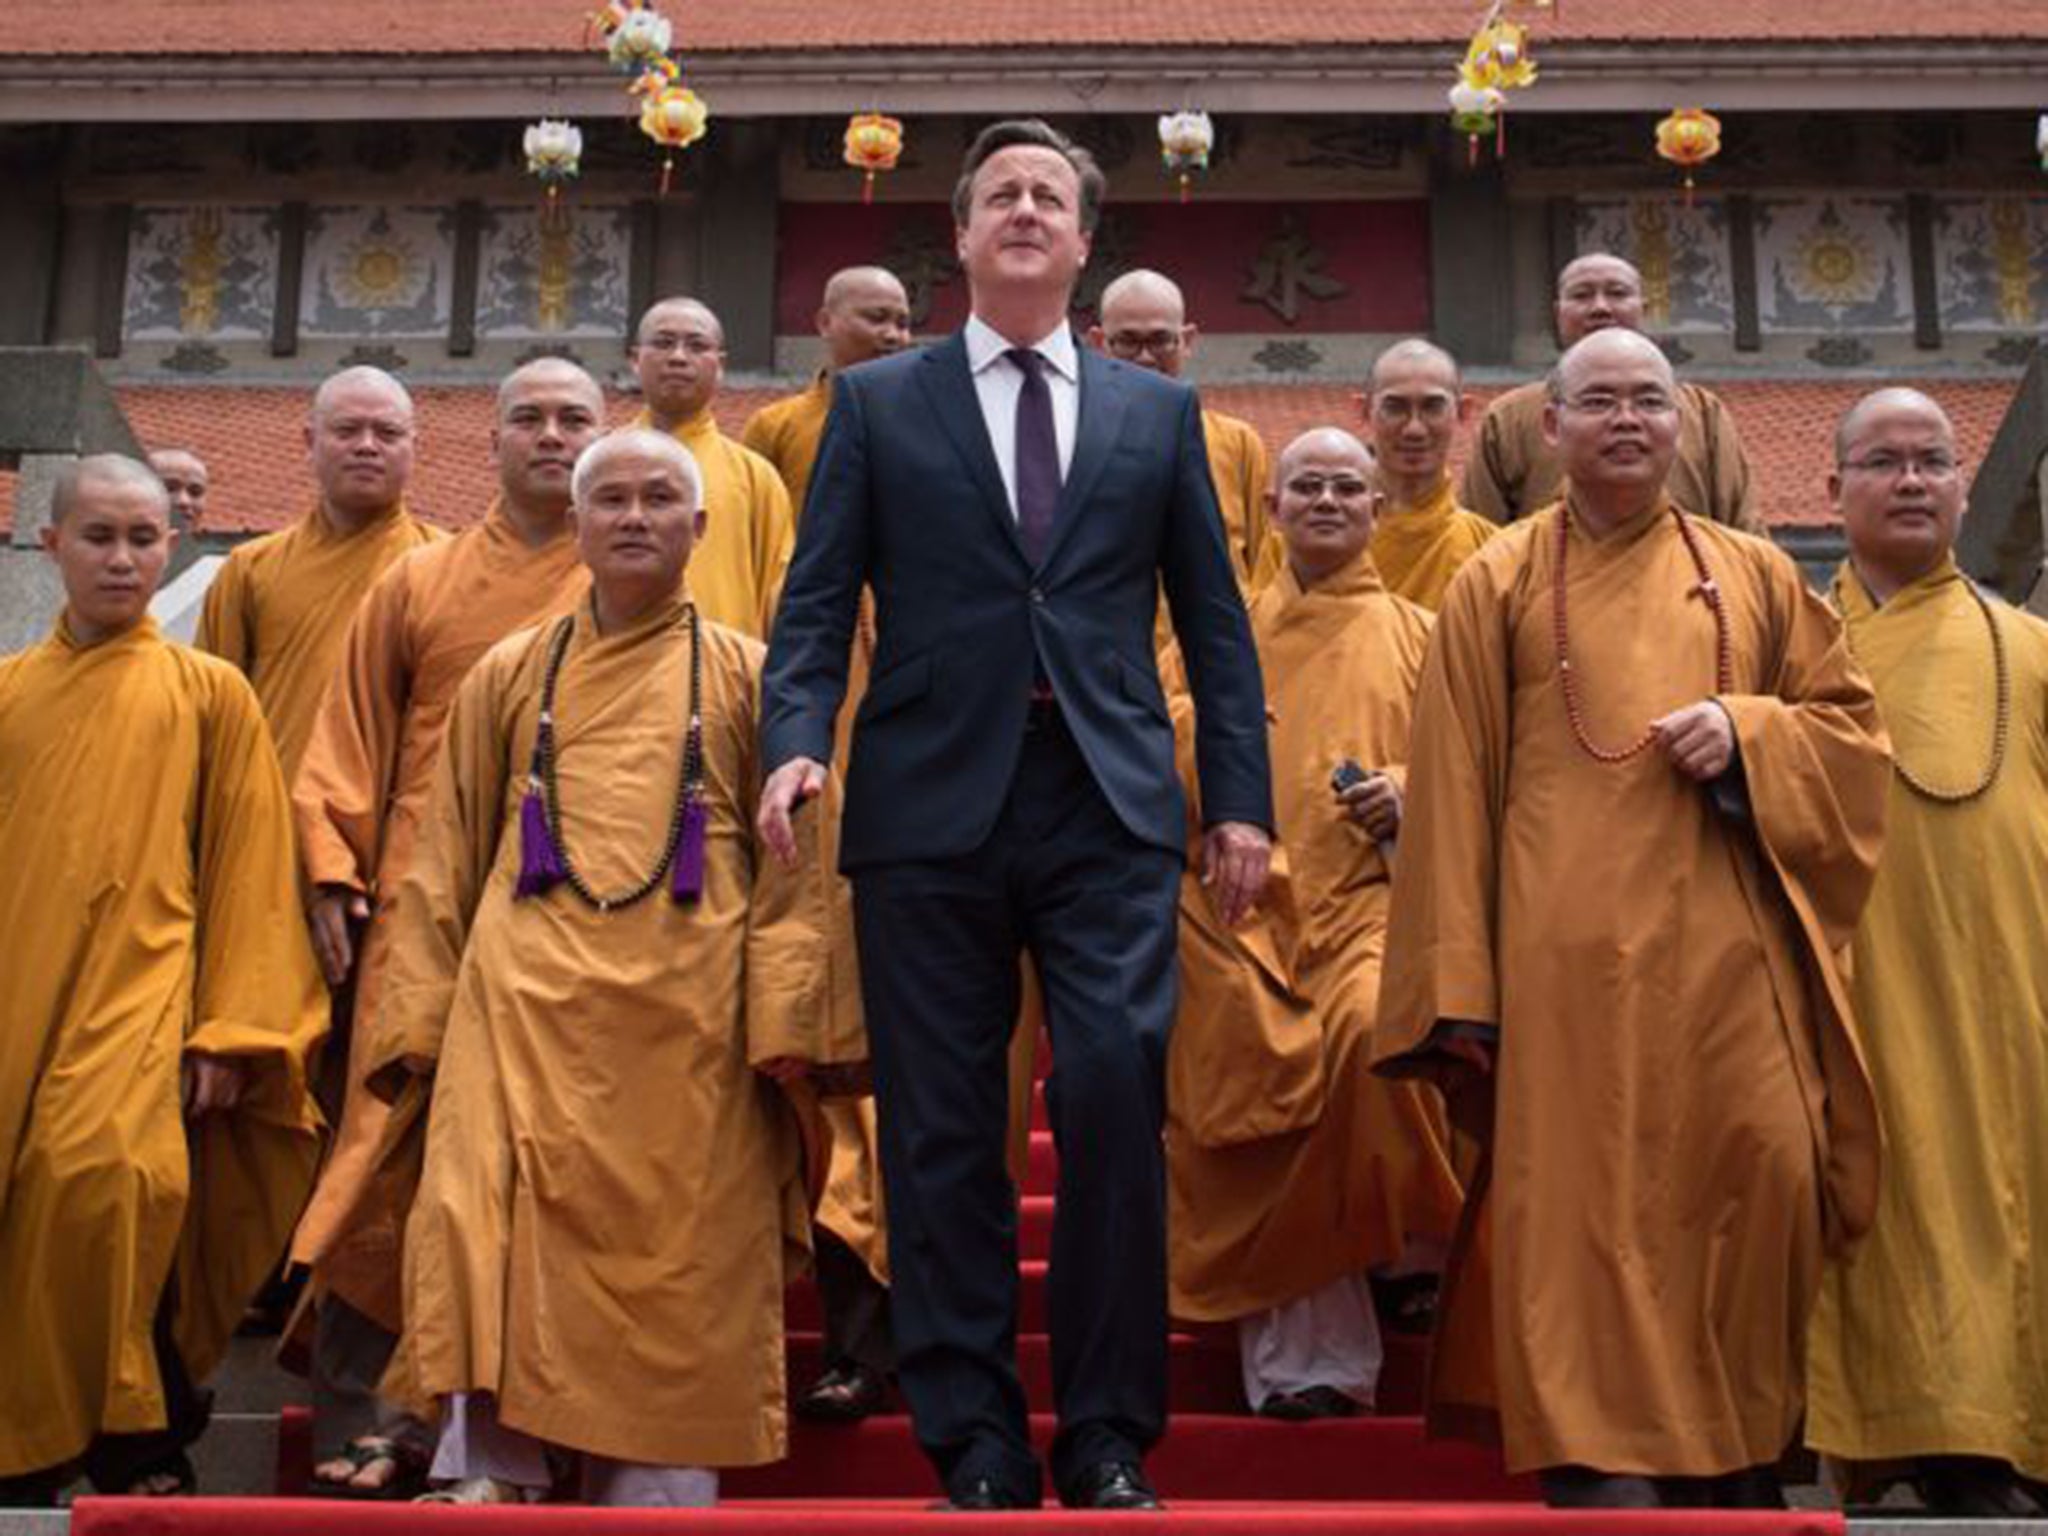 Prime Minister David Cameron is given a tour of the Vinh Nghiem Pagoda in Ho Chi Minh City by Buddhist monks on Thursday. Several MPs want Mr Cameron to set out clearer objectives before starting air strikes in Syria